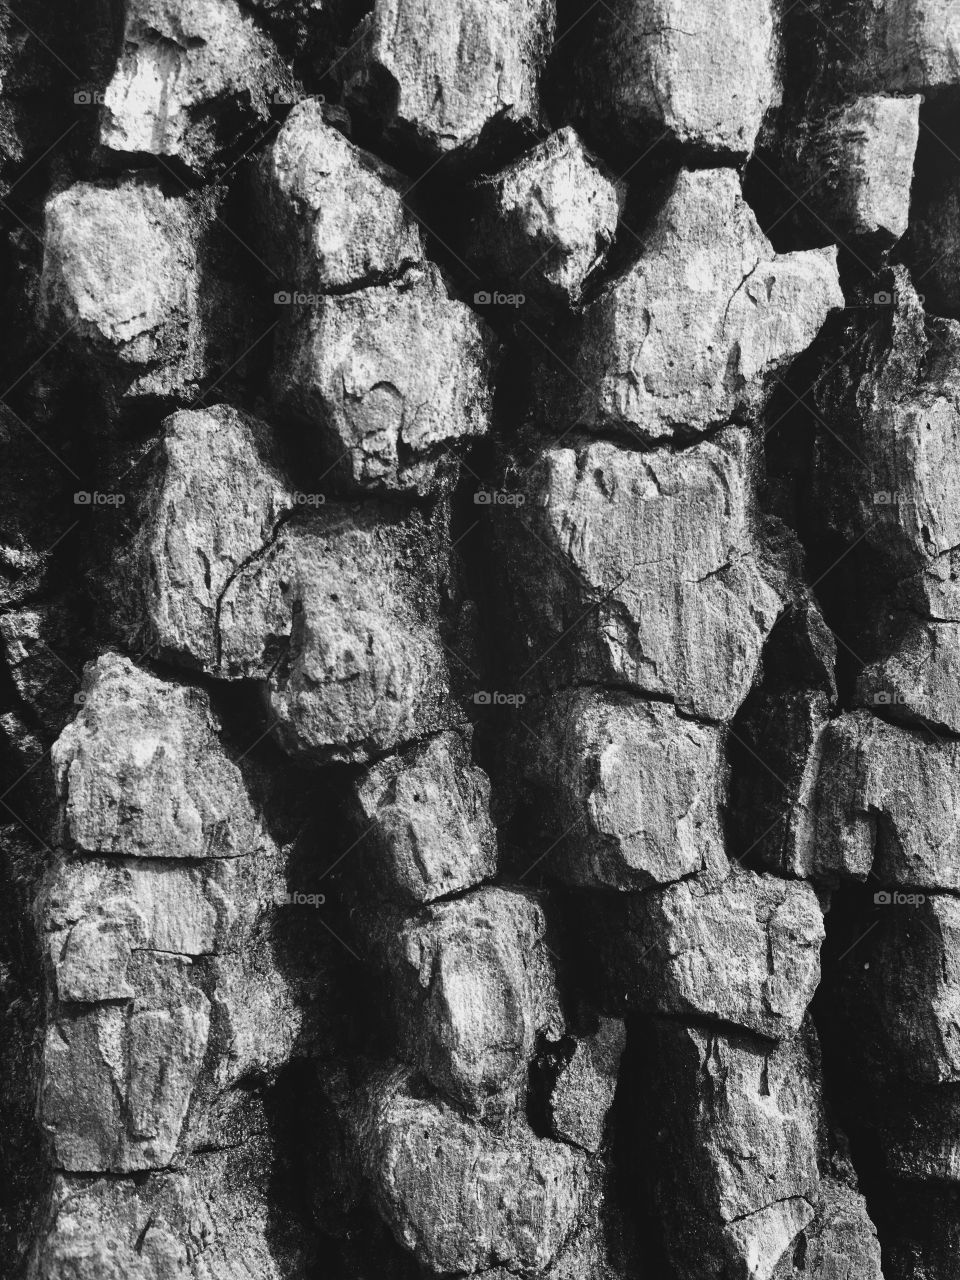 Black and white closeup of the corky bark of a sugarberry (or southern hackberry) tree, revealing the rich organic texture 